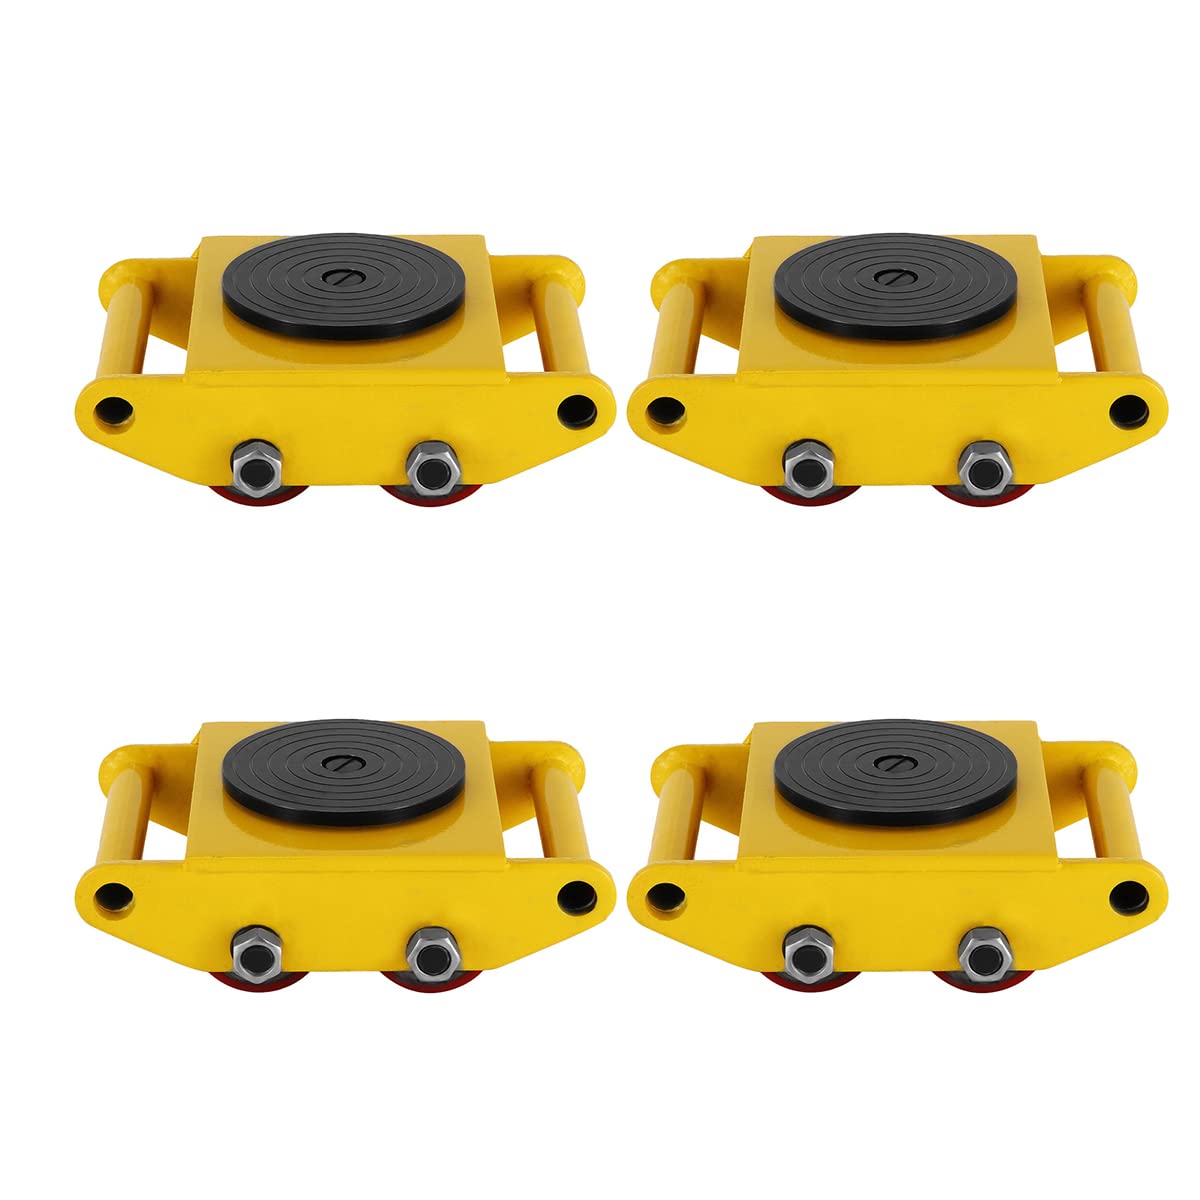 ZXMOTO Heavy Duty Machine Dolly Skates Industrial Machinery 6T 13200LBS,4pcs Machinery Mover Cargo Trolley with Steel Rollers Cap 360 Degree Rotation